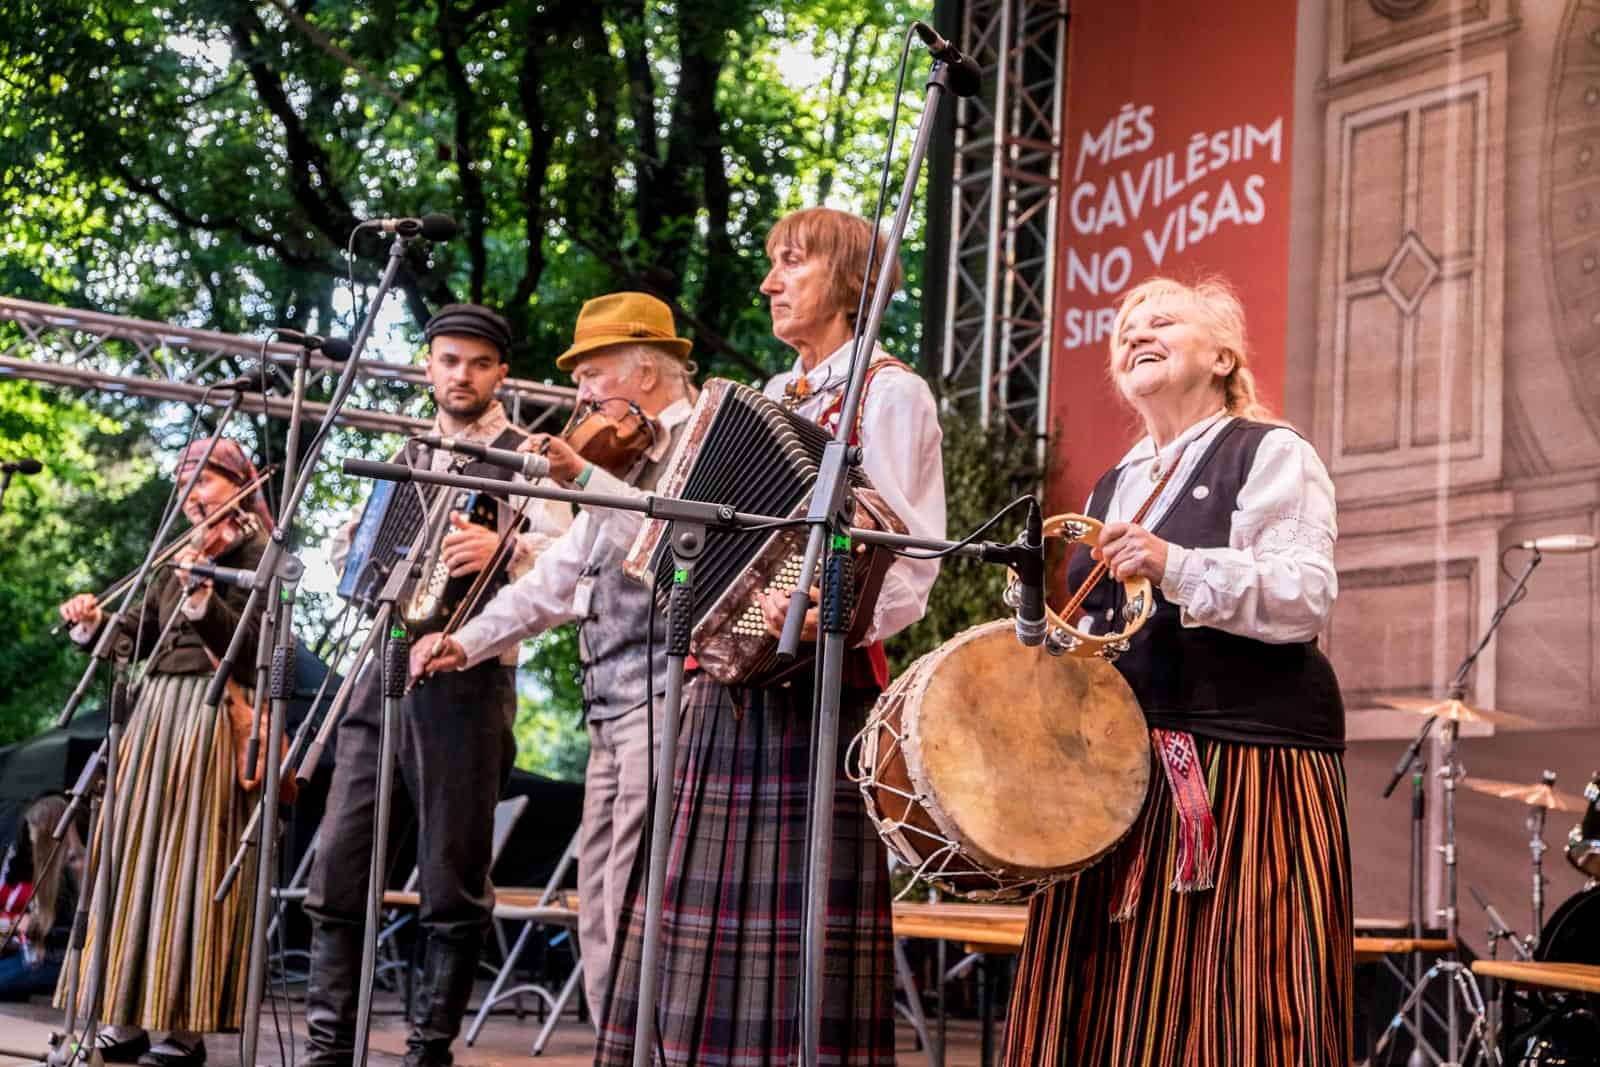 Four man band performs on stage in a Riga Park for the Song and Dance Celebration in Latvia